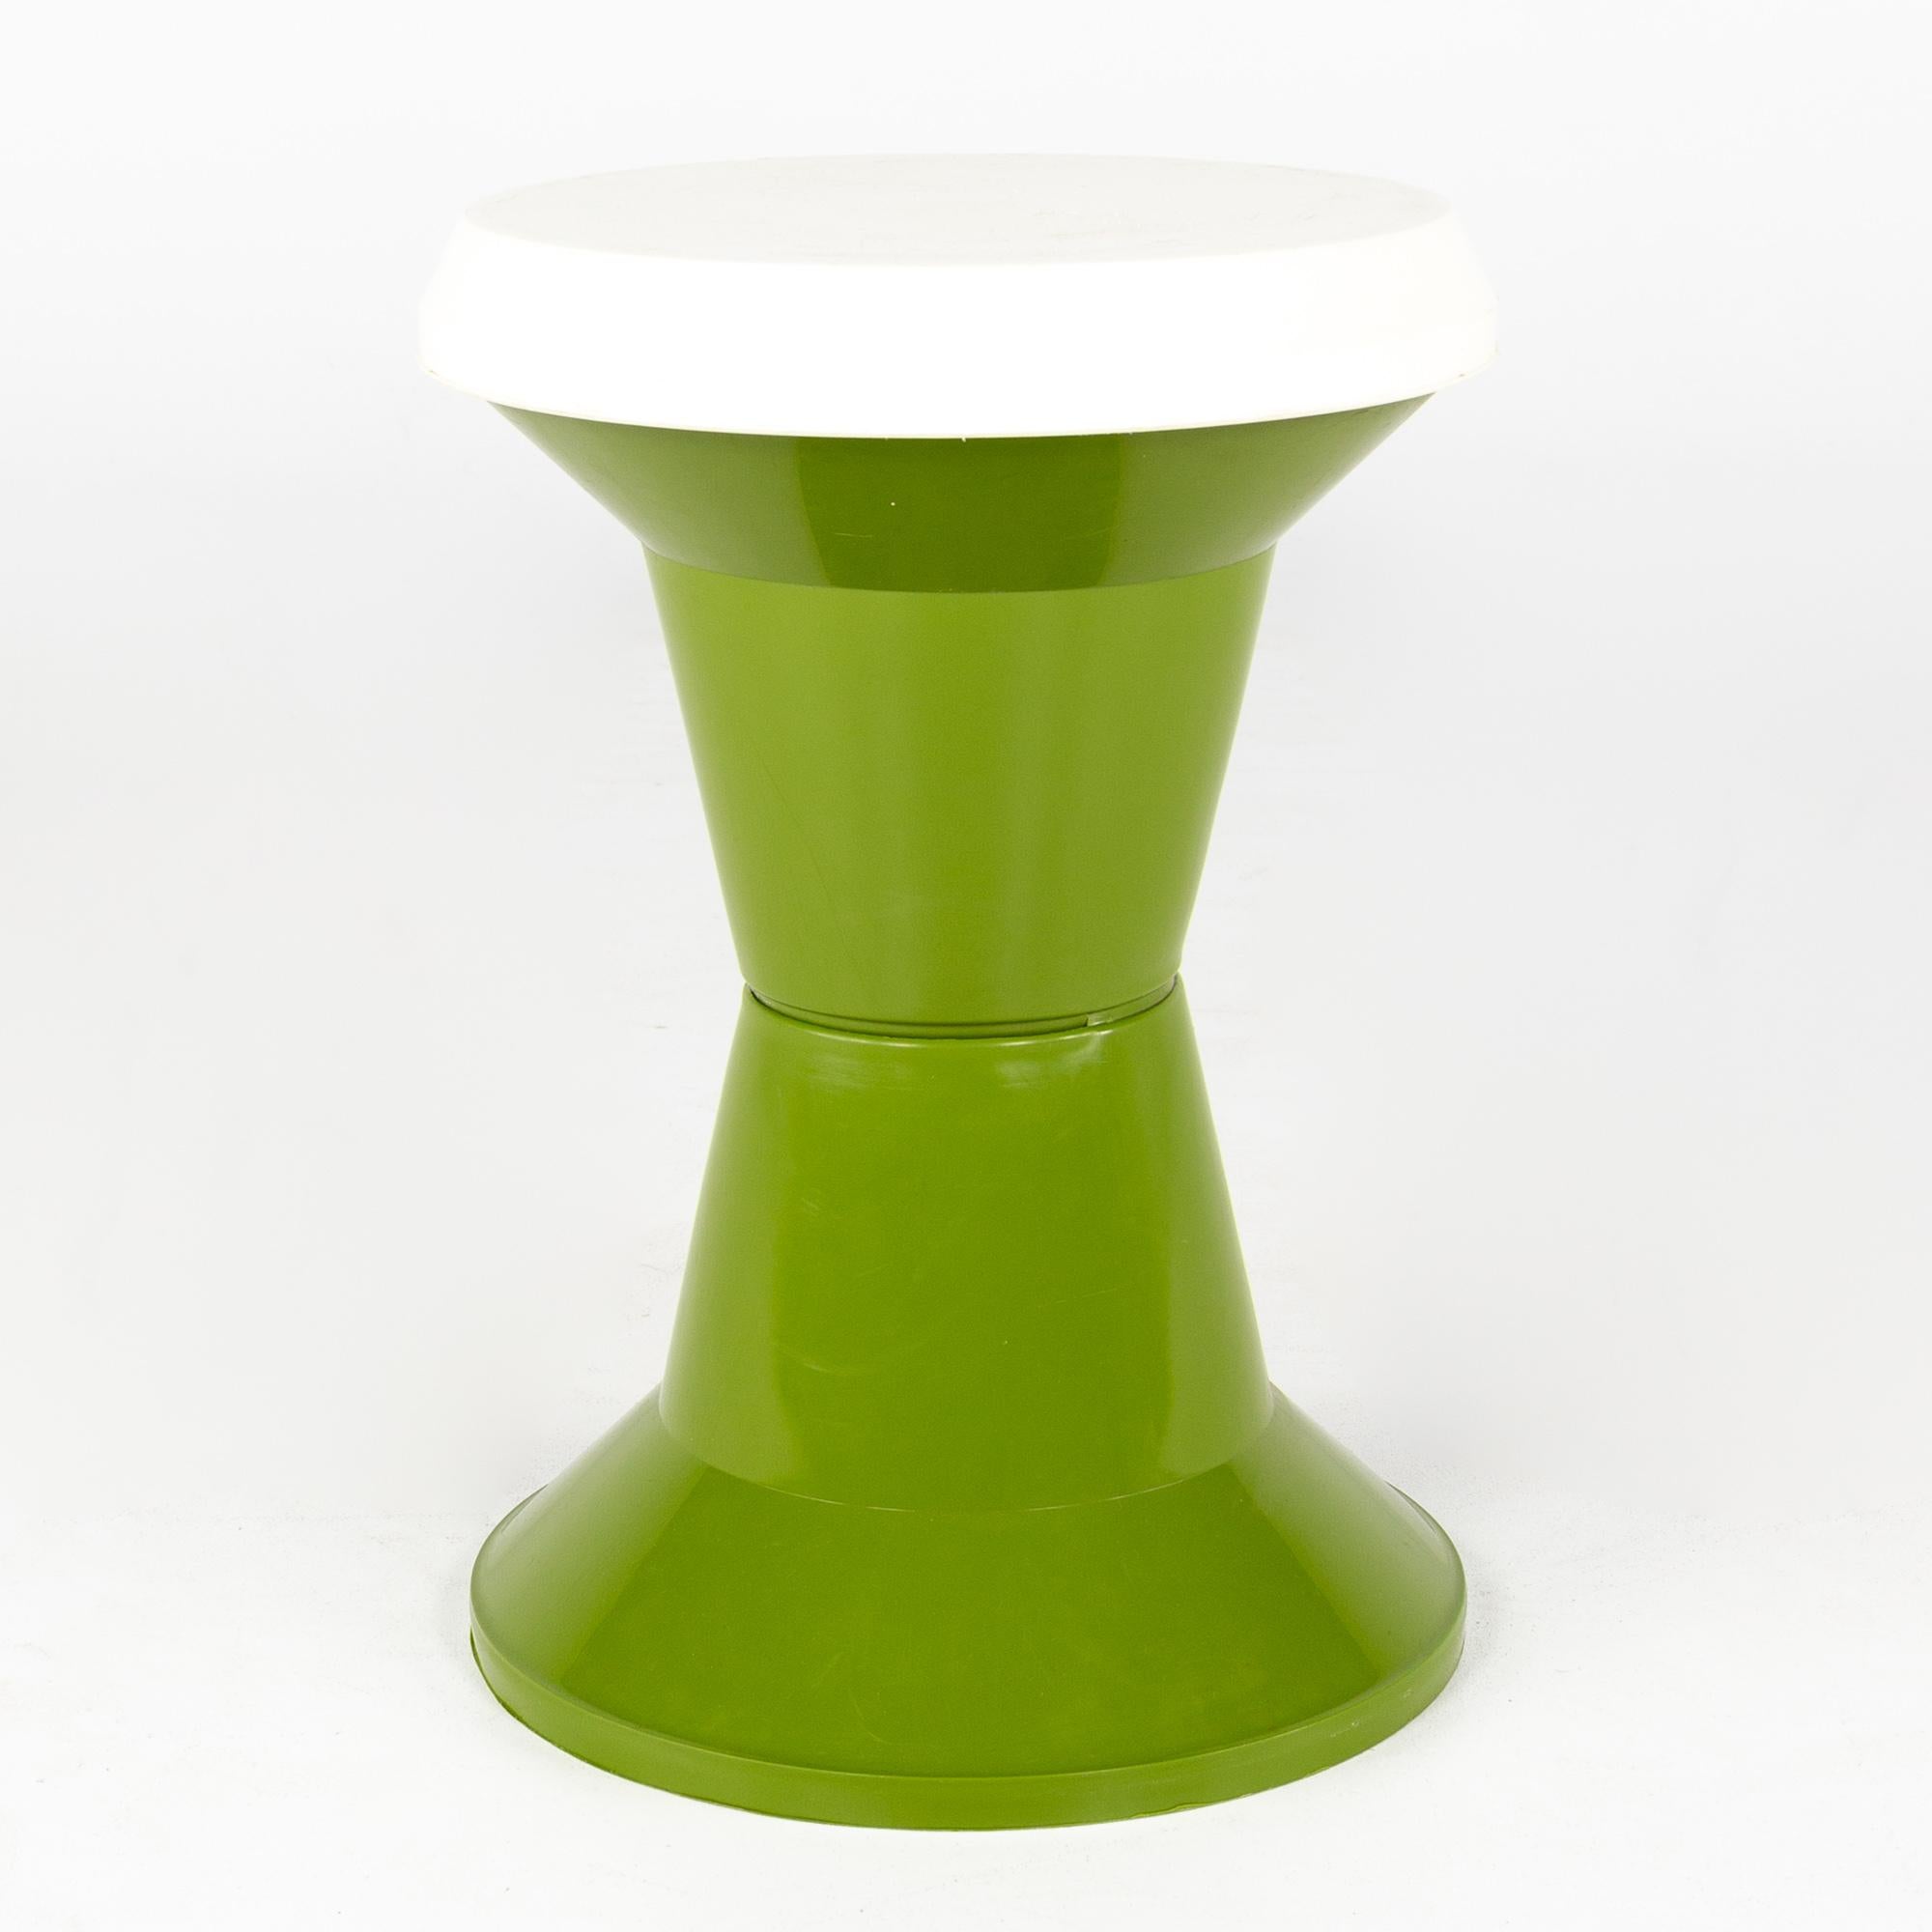 Mid century green planter stool

This stool measures: 12 wide x 12 deep x 17 inches high

All pieces of furniture can be had in what we call restored vintage condition. That means the piece is restored upon purchase so it’s free of watermarks,